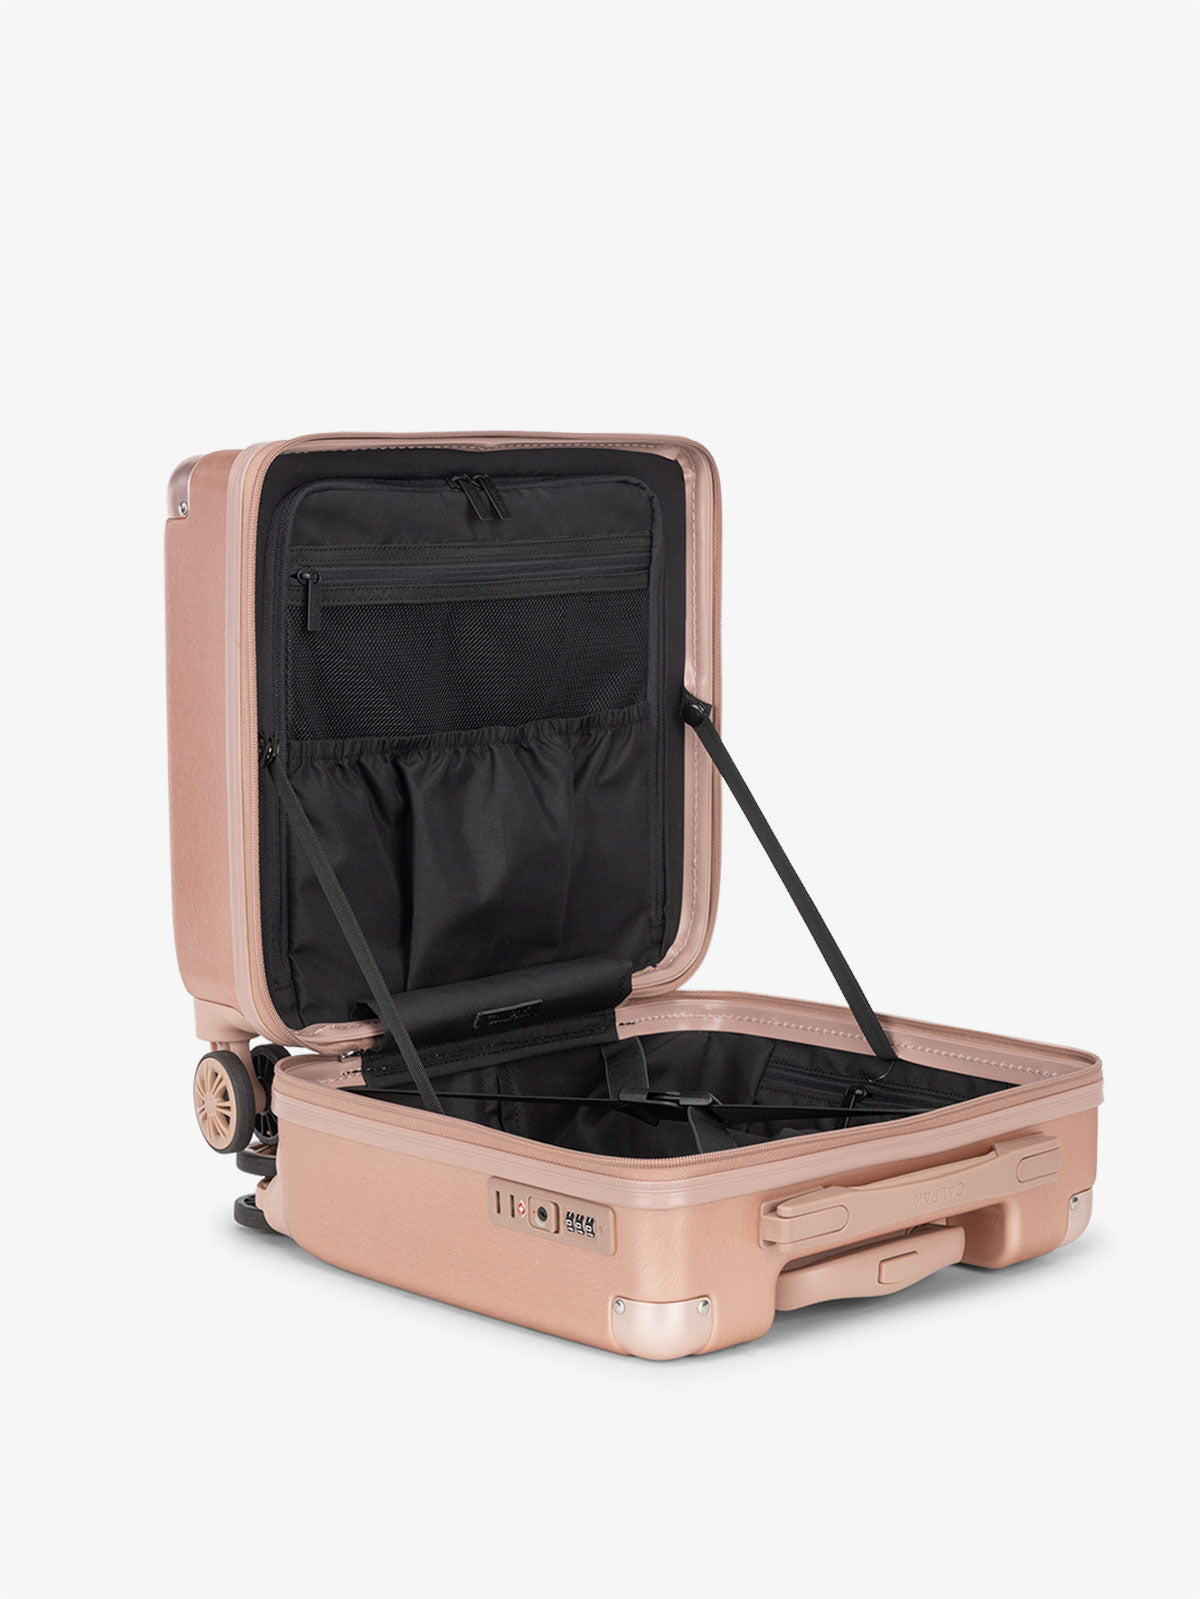 CALPAK Ambuer 16 inch wheeled carry on luggage with divider and multiple interior pockets in rose gold